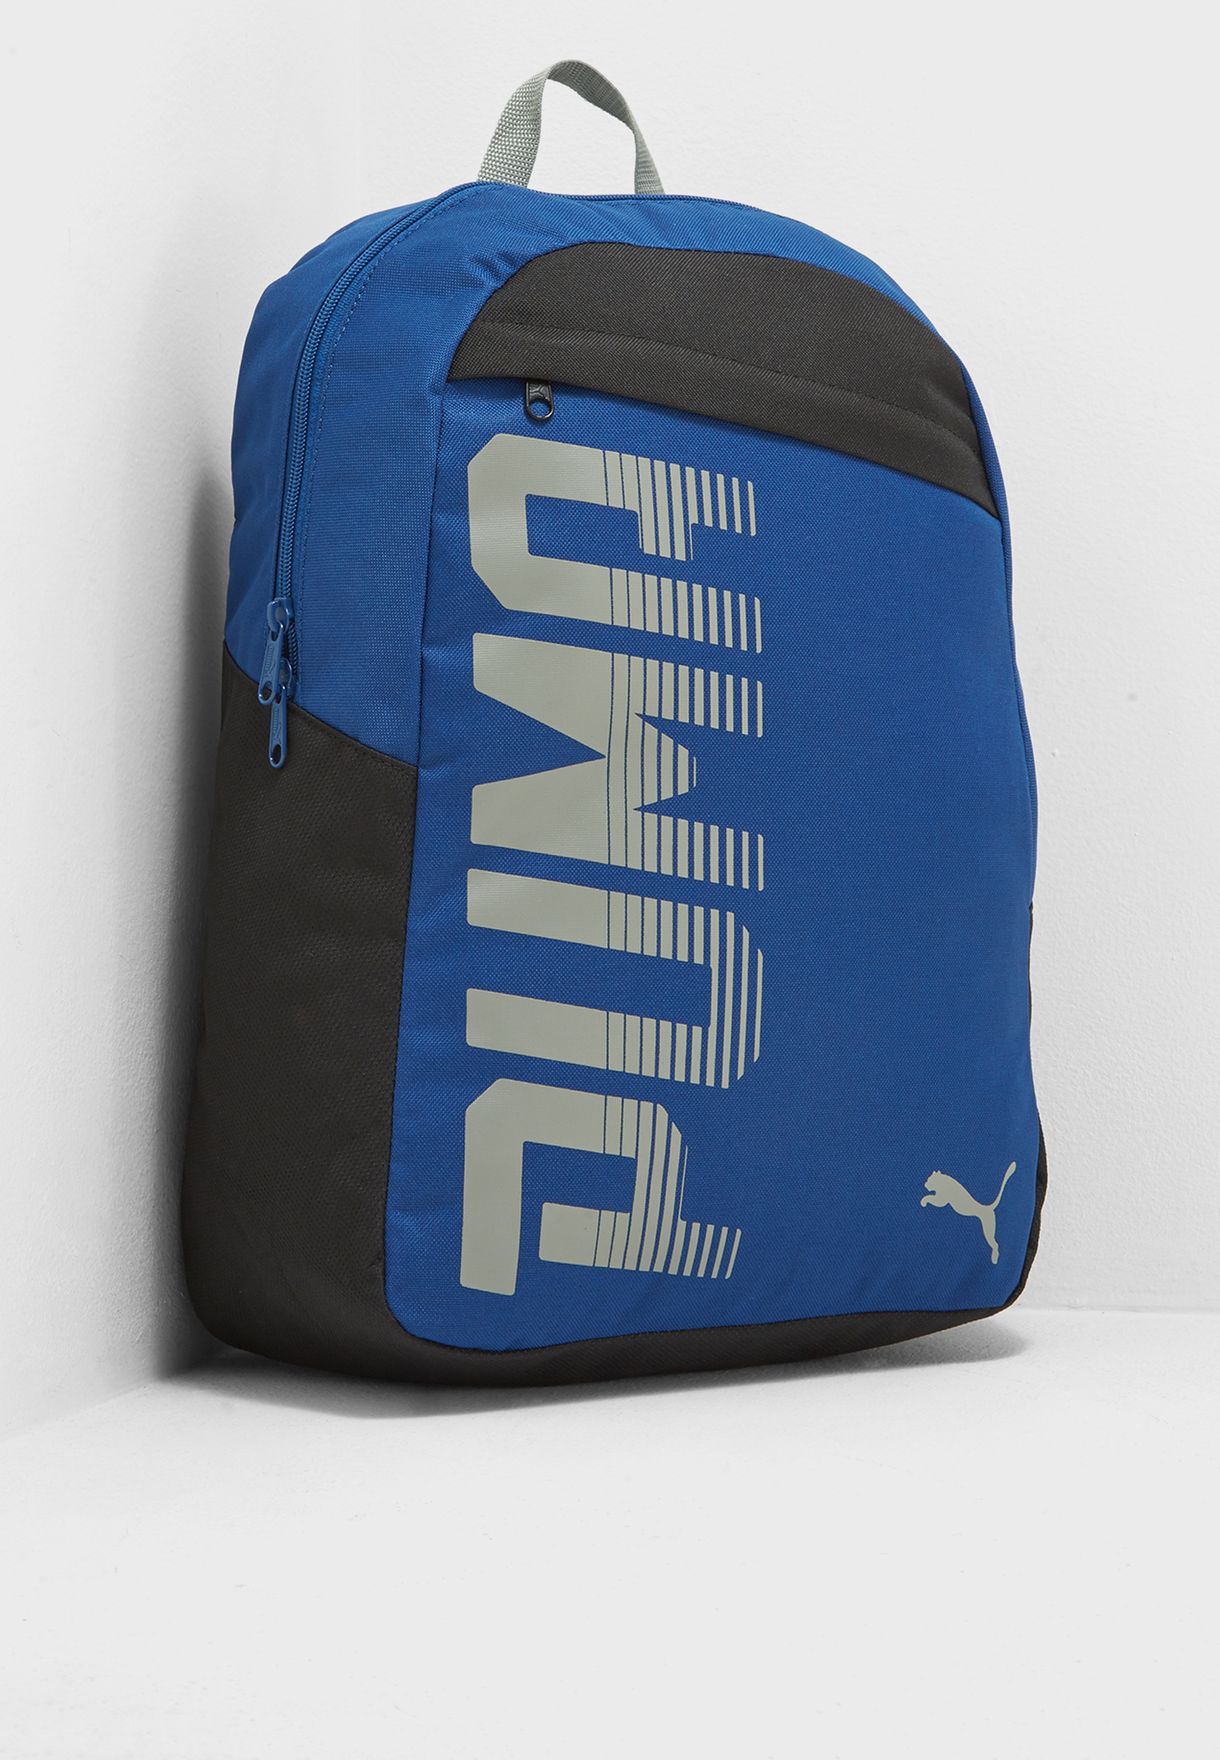 puma new navy casual backpack